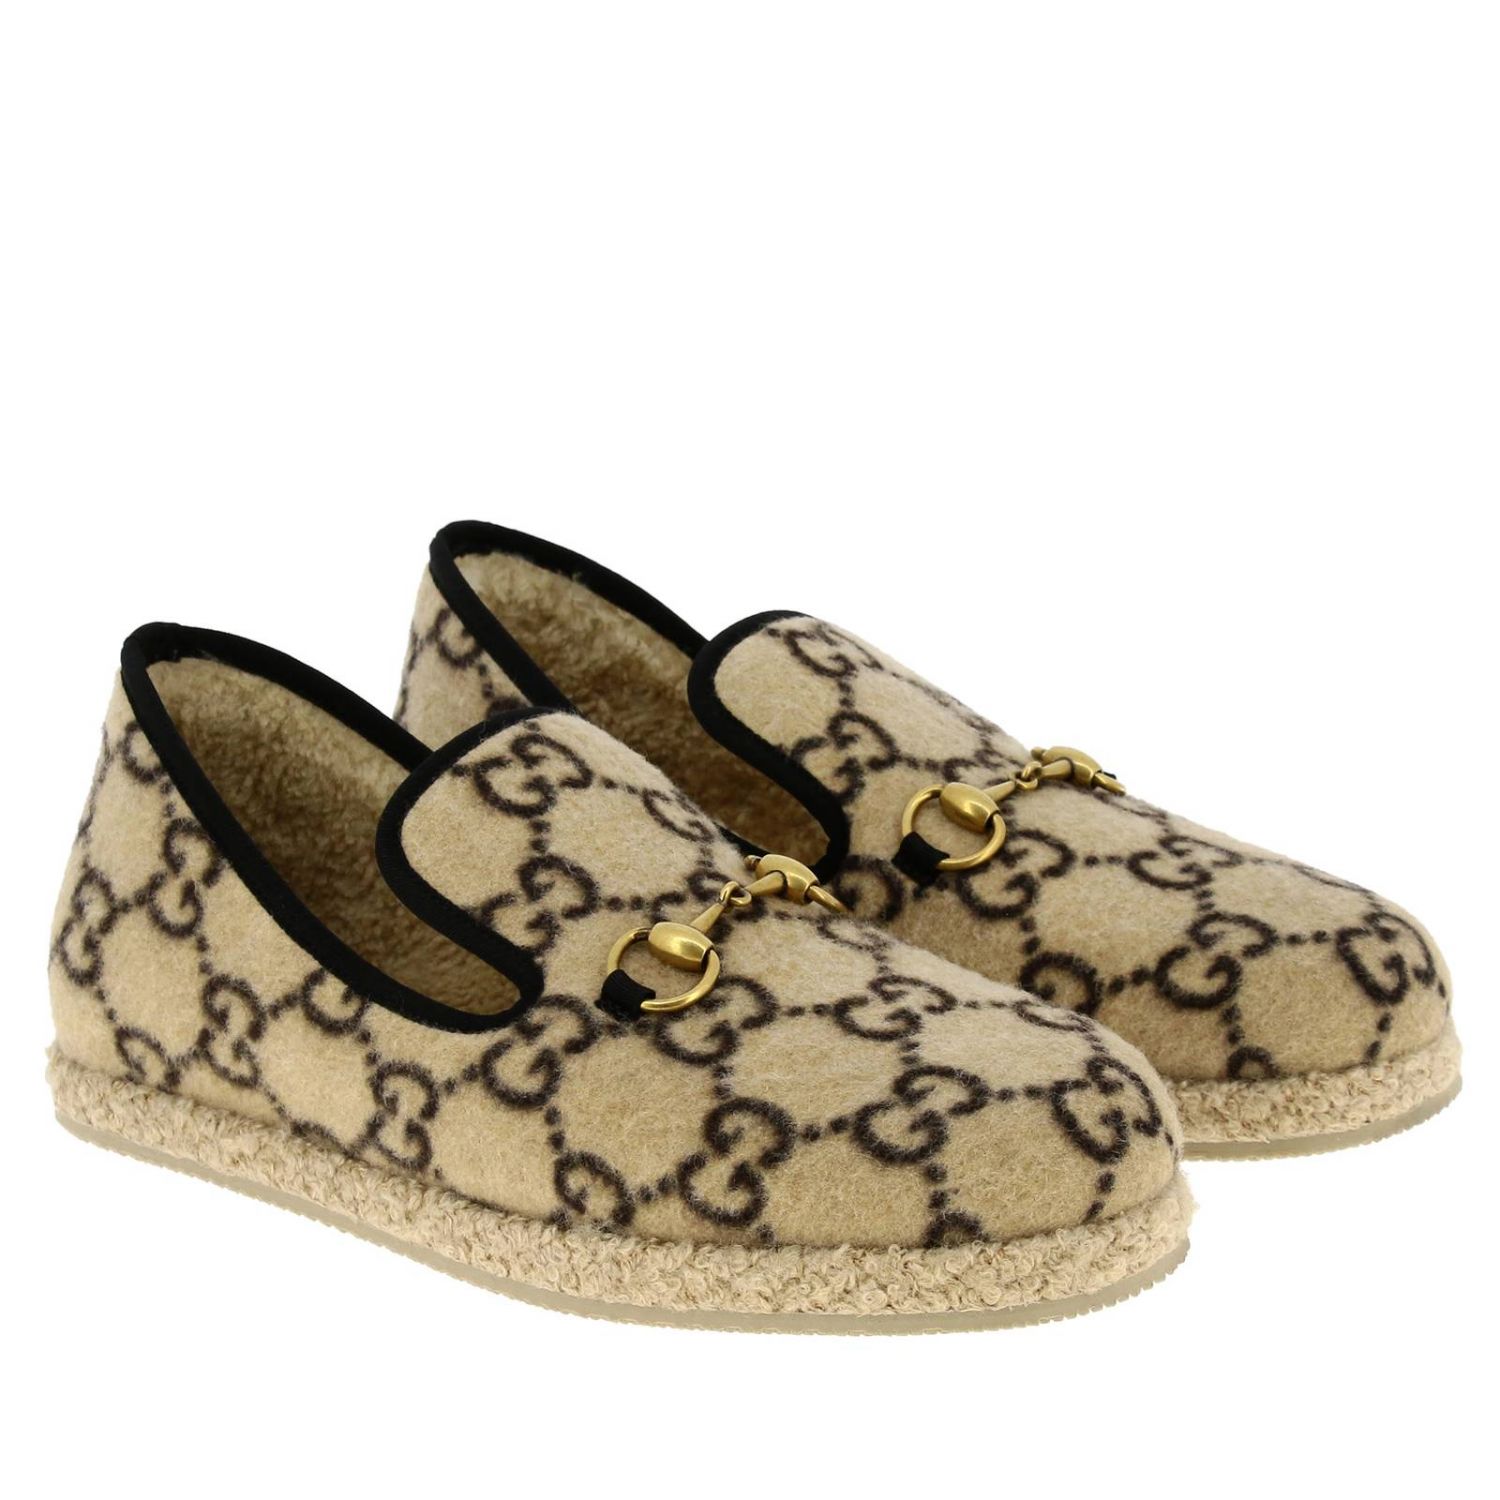 Gucci loafers in GG Supreme wool all over with horsebit | Loafers Gucci ...